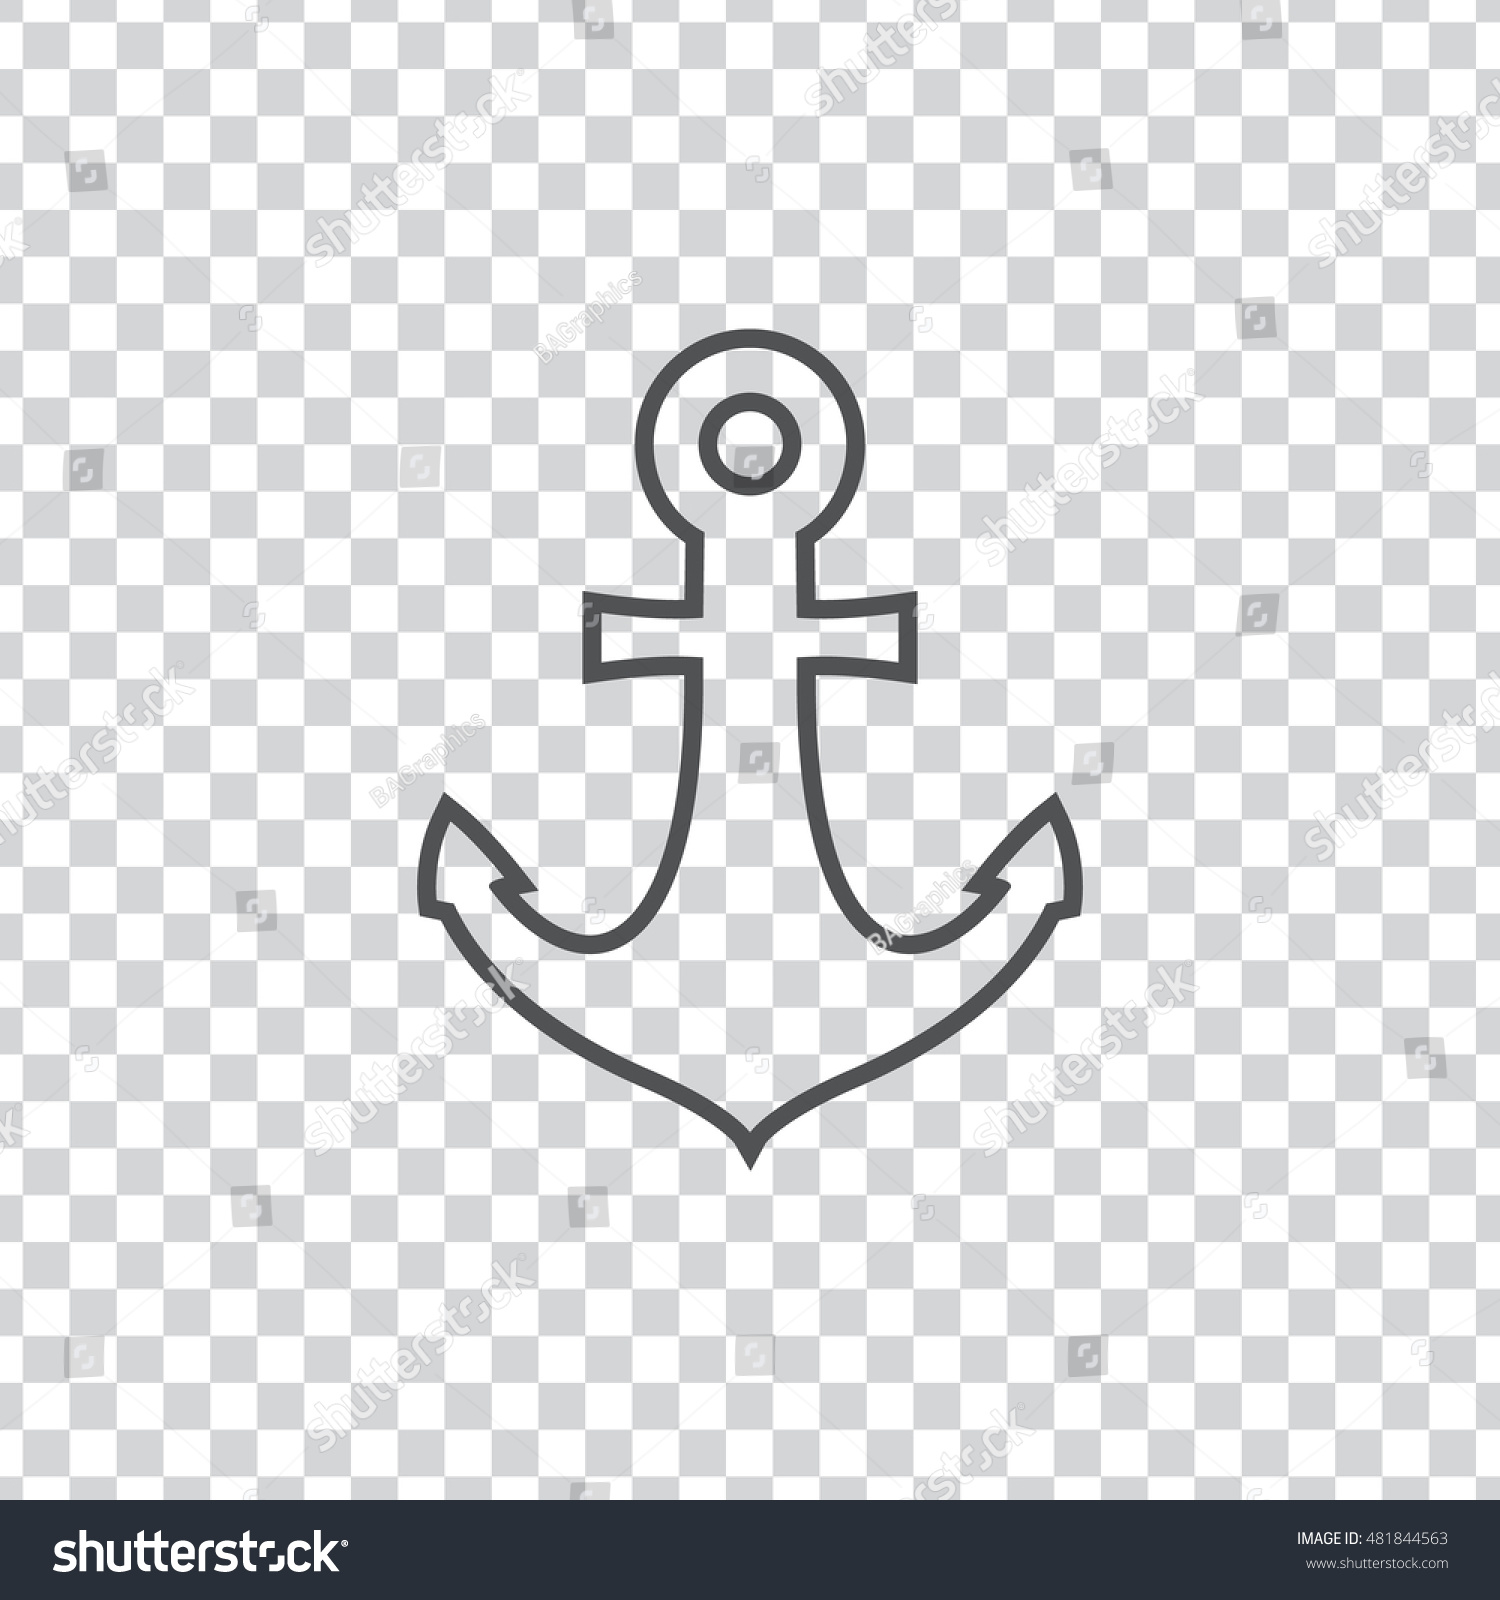 SVG of Anchor icon. Anchor clip art. Art design illustration. Compatible with ai, cdr, pdf, png and eps formats. Compatible with ai, cdr, jpg, png, svg, pdf, ico and eps. svg